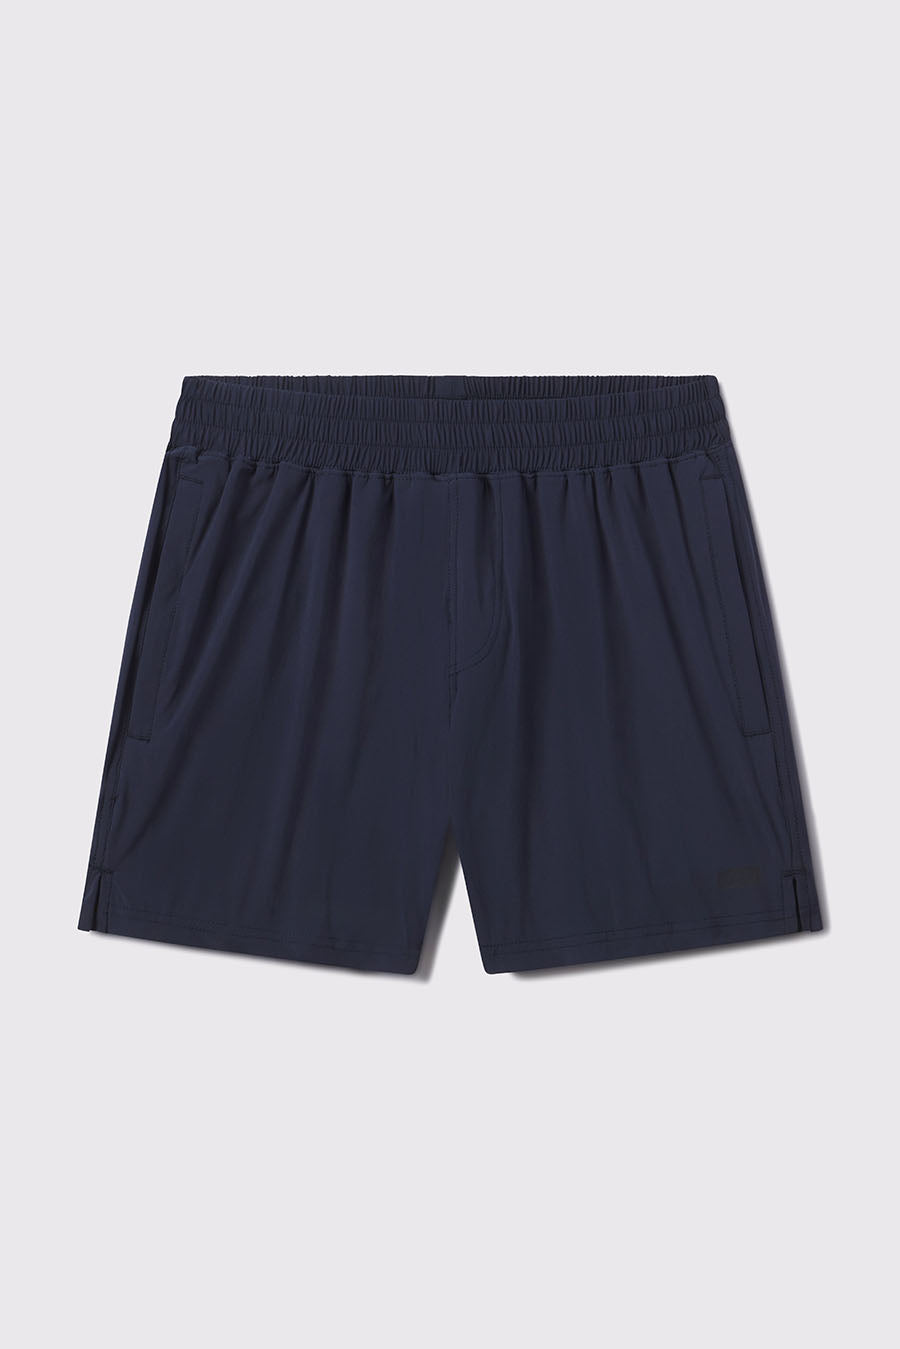 Ranger Short - Navy - photo from front flat lay #color_navy